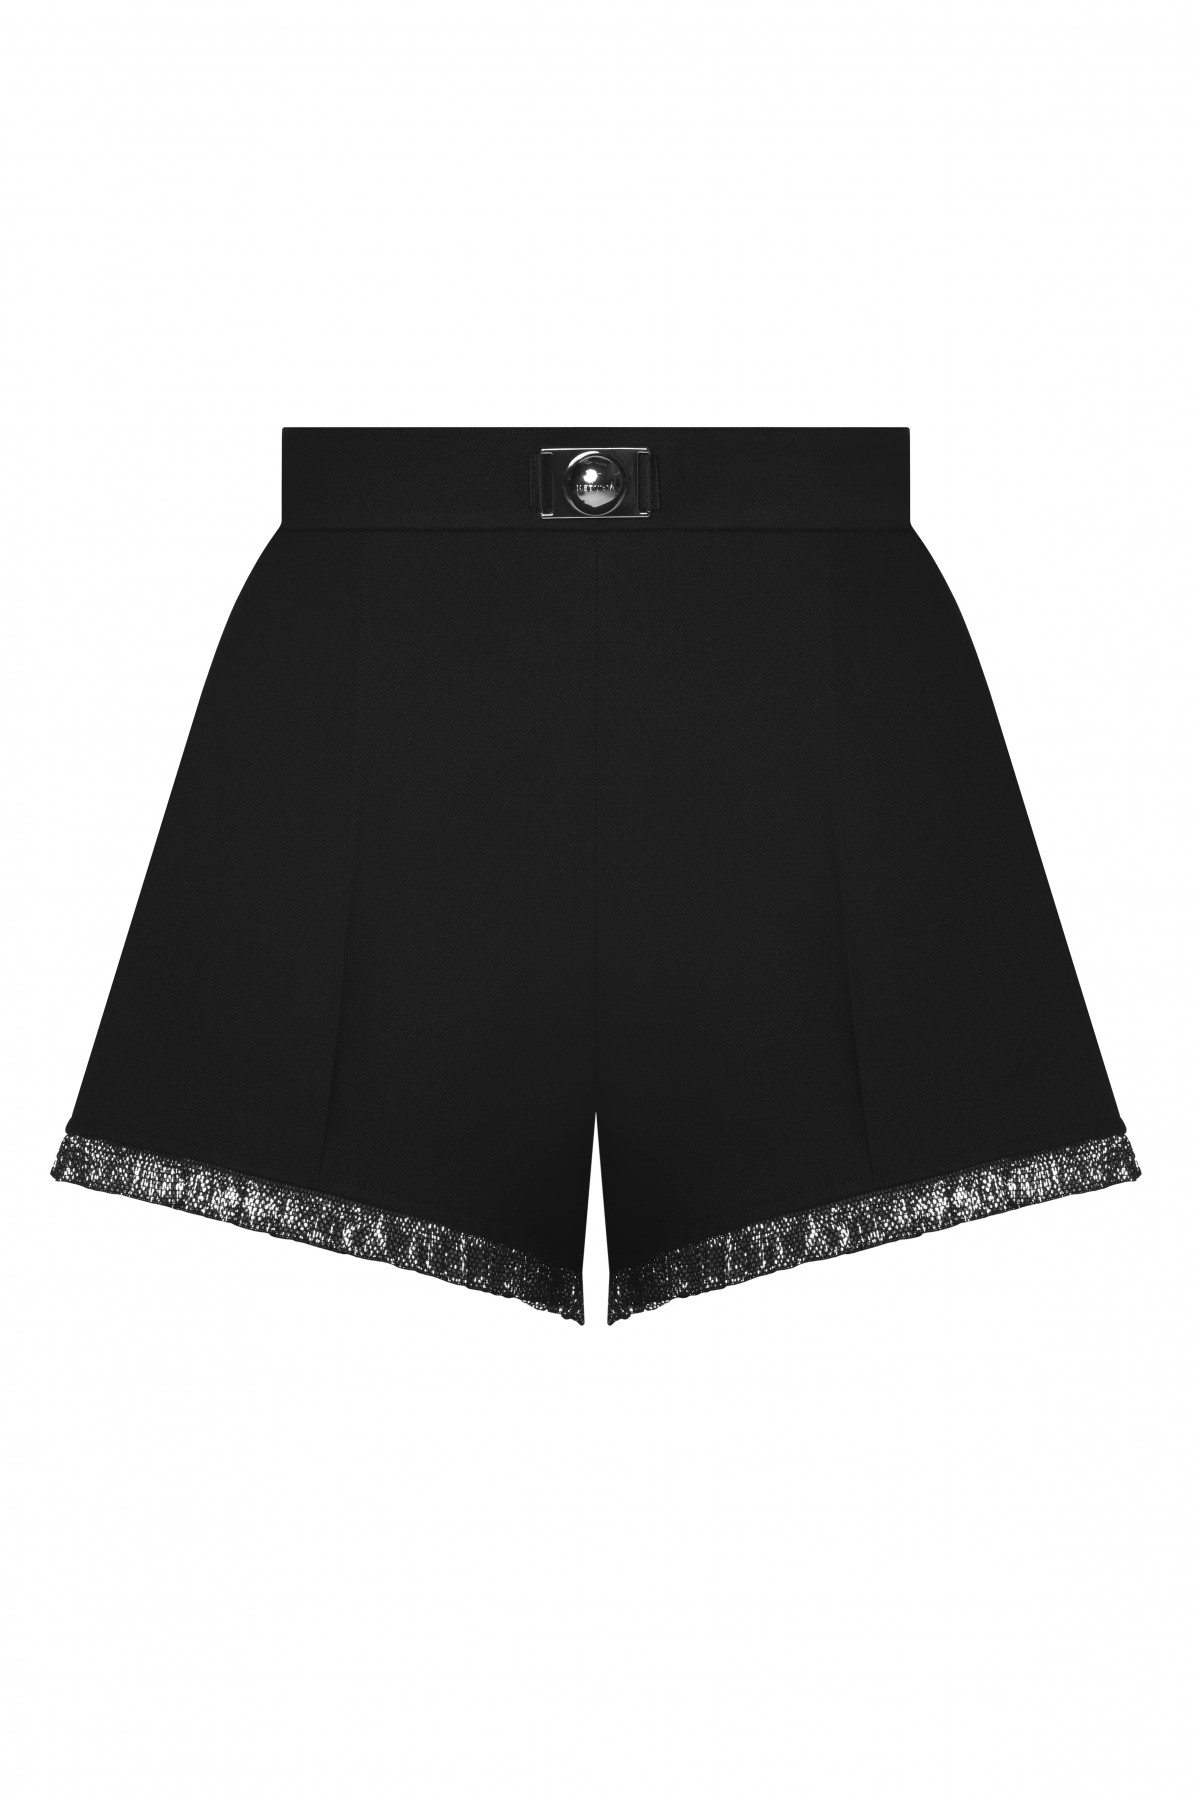 GEORGE KEBURIA - METALLIC LACE-TRIMMED SHORTS